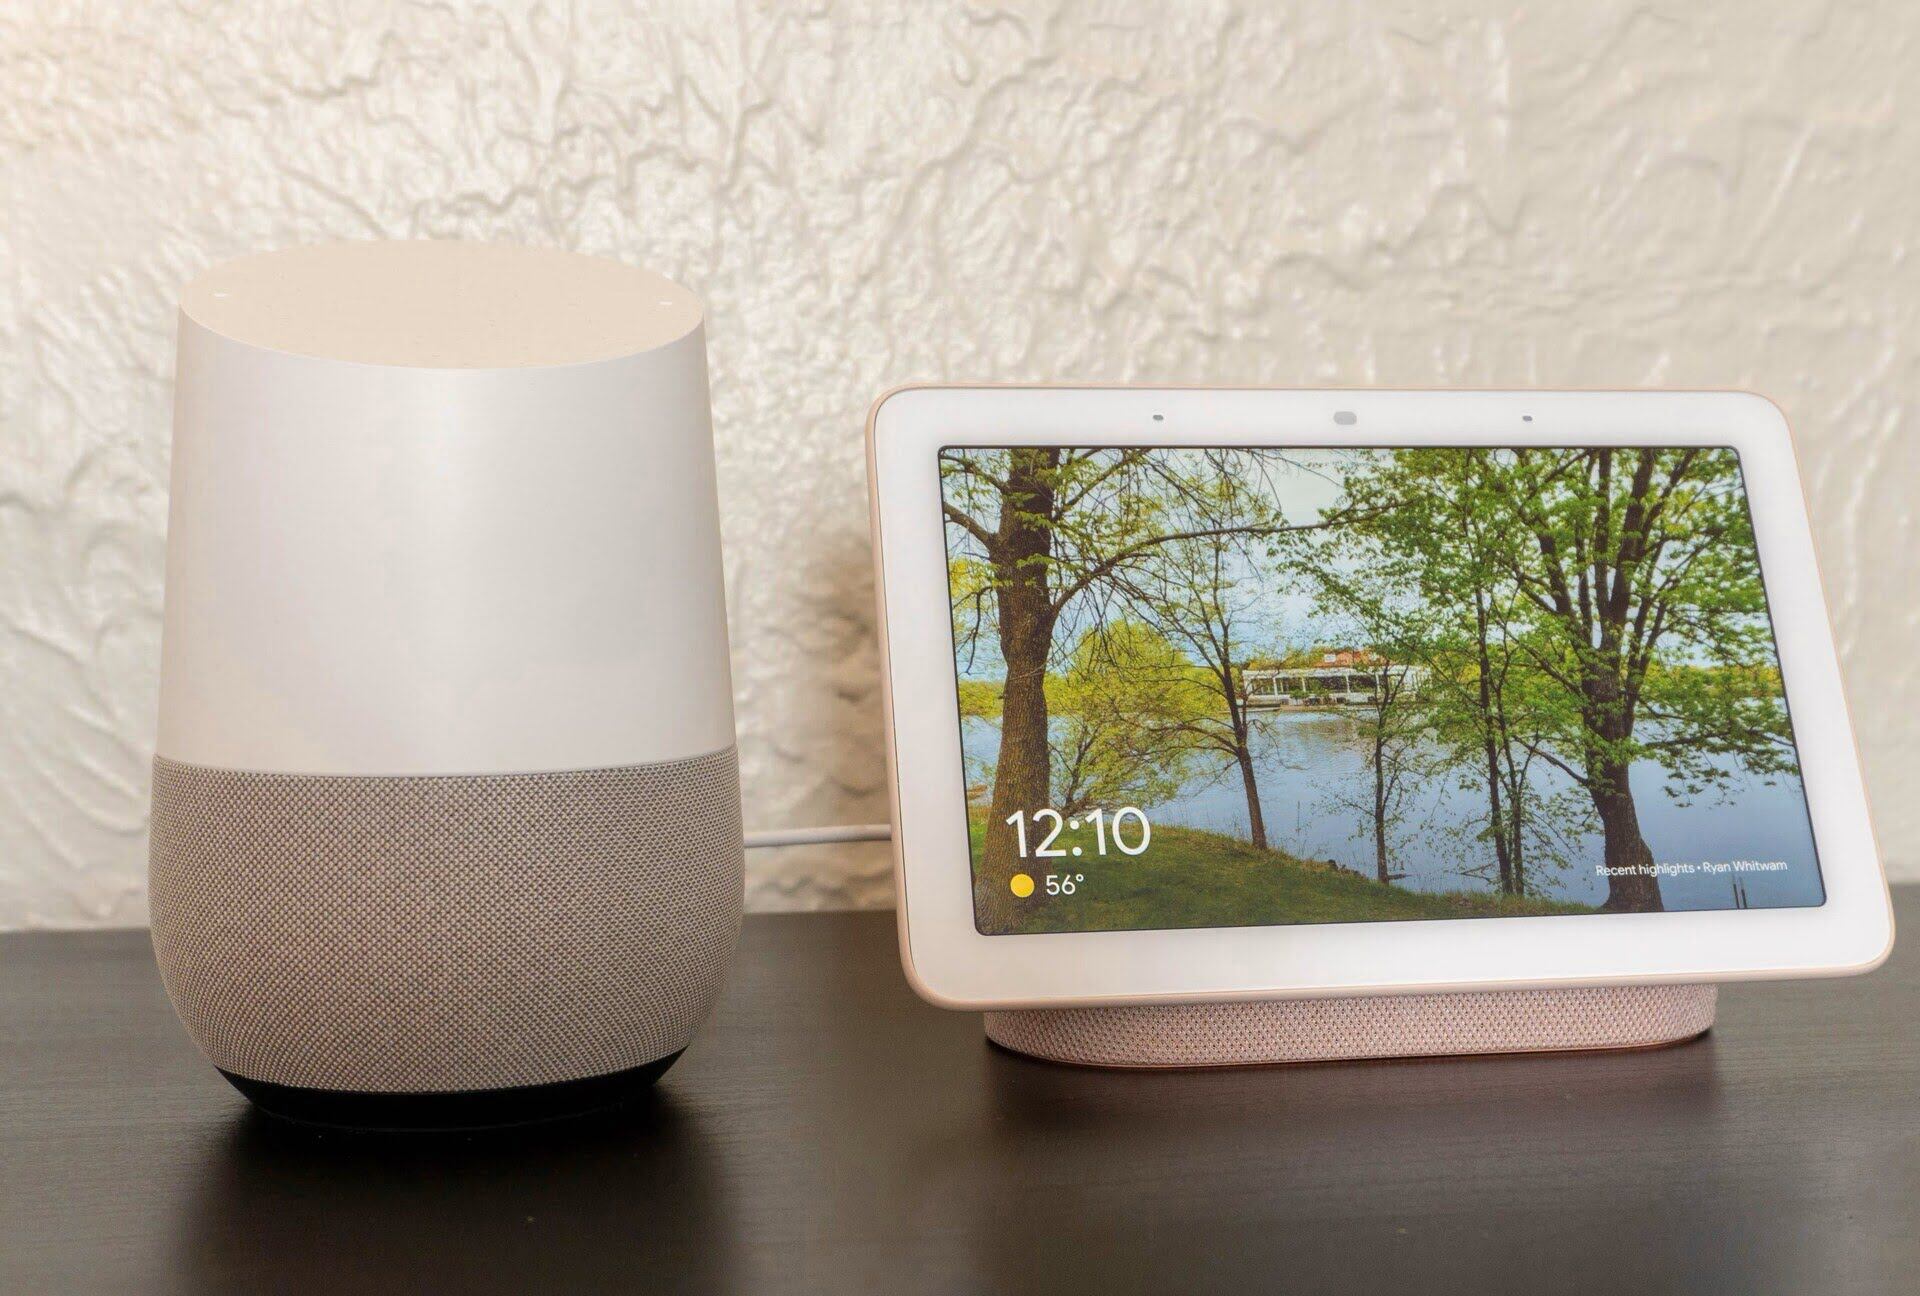 How To Reset A Google Home Hub